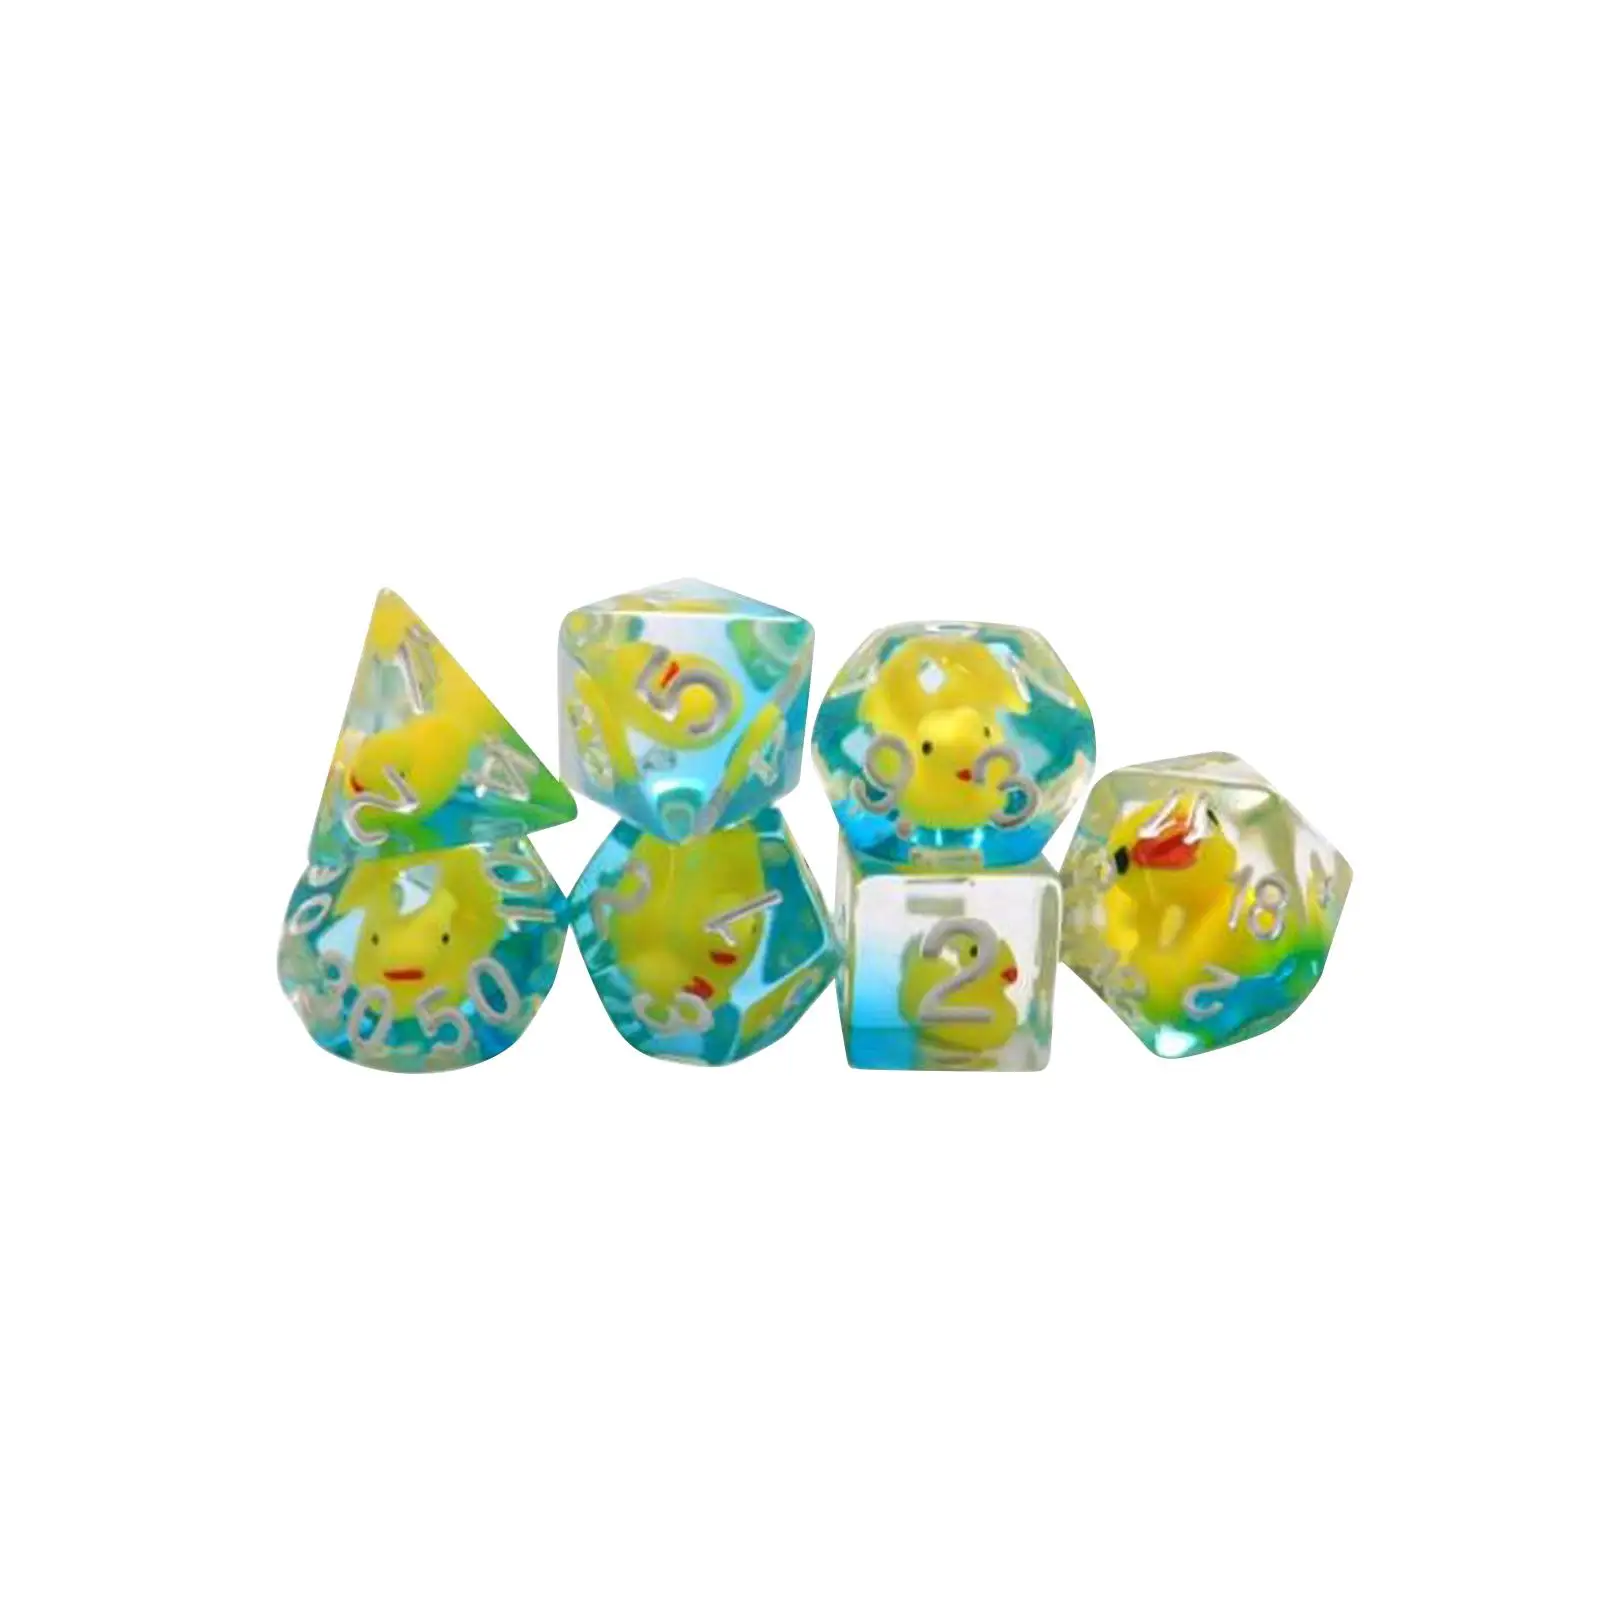 7x Resin Dices Filled with Ducks Animal Polyhedral Dices Set Card Games